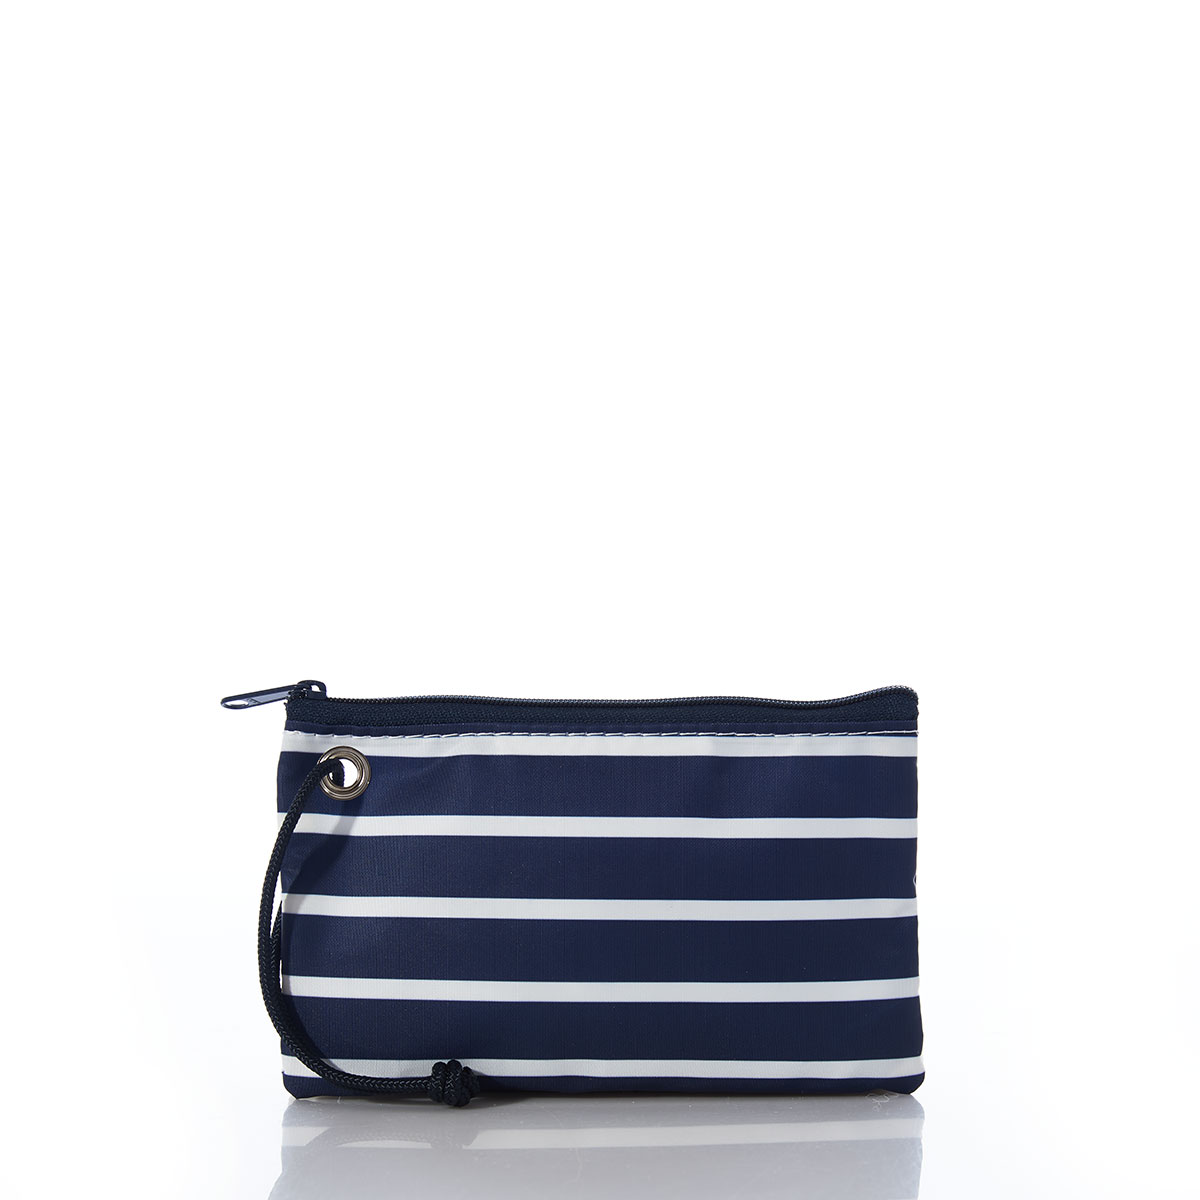 back view of red anchor applique on navy and white stripes printed on recycled sail cloth wristlet with navy zipper and wristlet strap